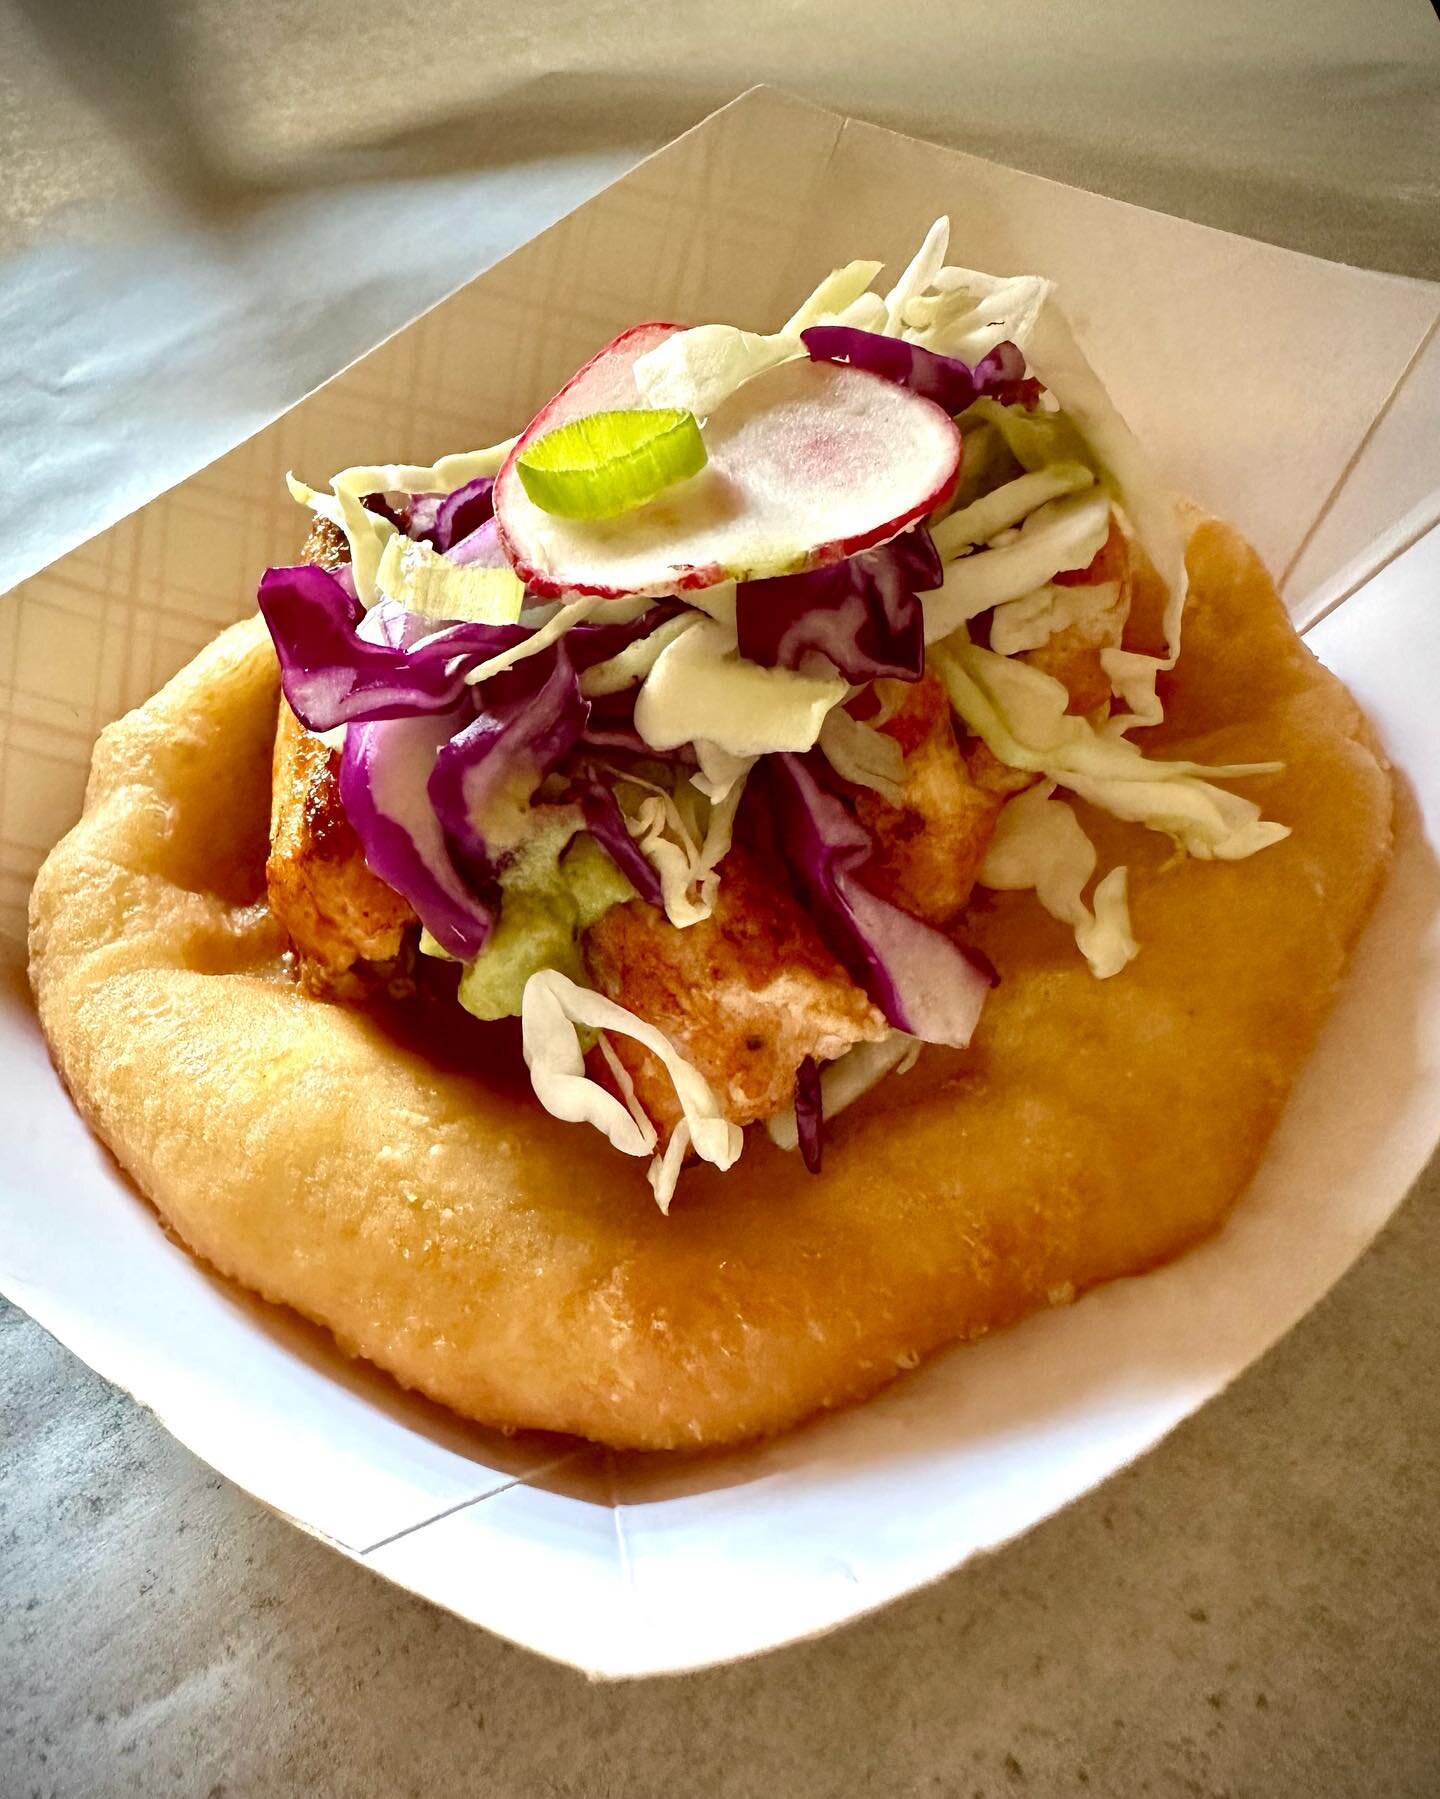 It&rsquo;s @ballardseafoodfest today (&amp; tomorrow)! Find the truck serving (near 2026 NW Market St) from 11am-9pm. 

On special: 
&bull; Spice rubbed salmon Indian Tacos with chipotle lime slaw &amp; avocado salsa 
&bull; Mango Tequila Shrimp Indi